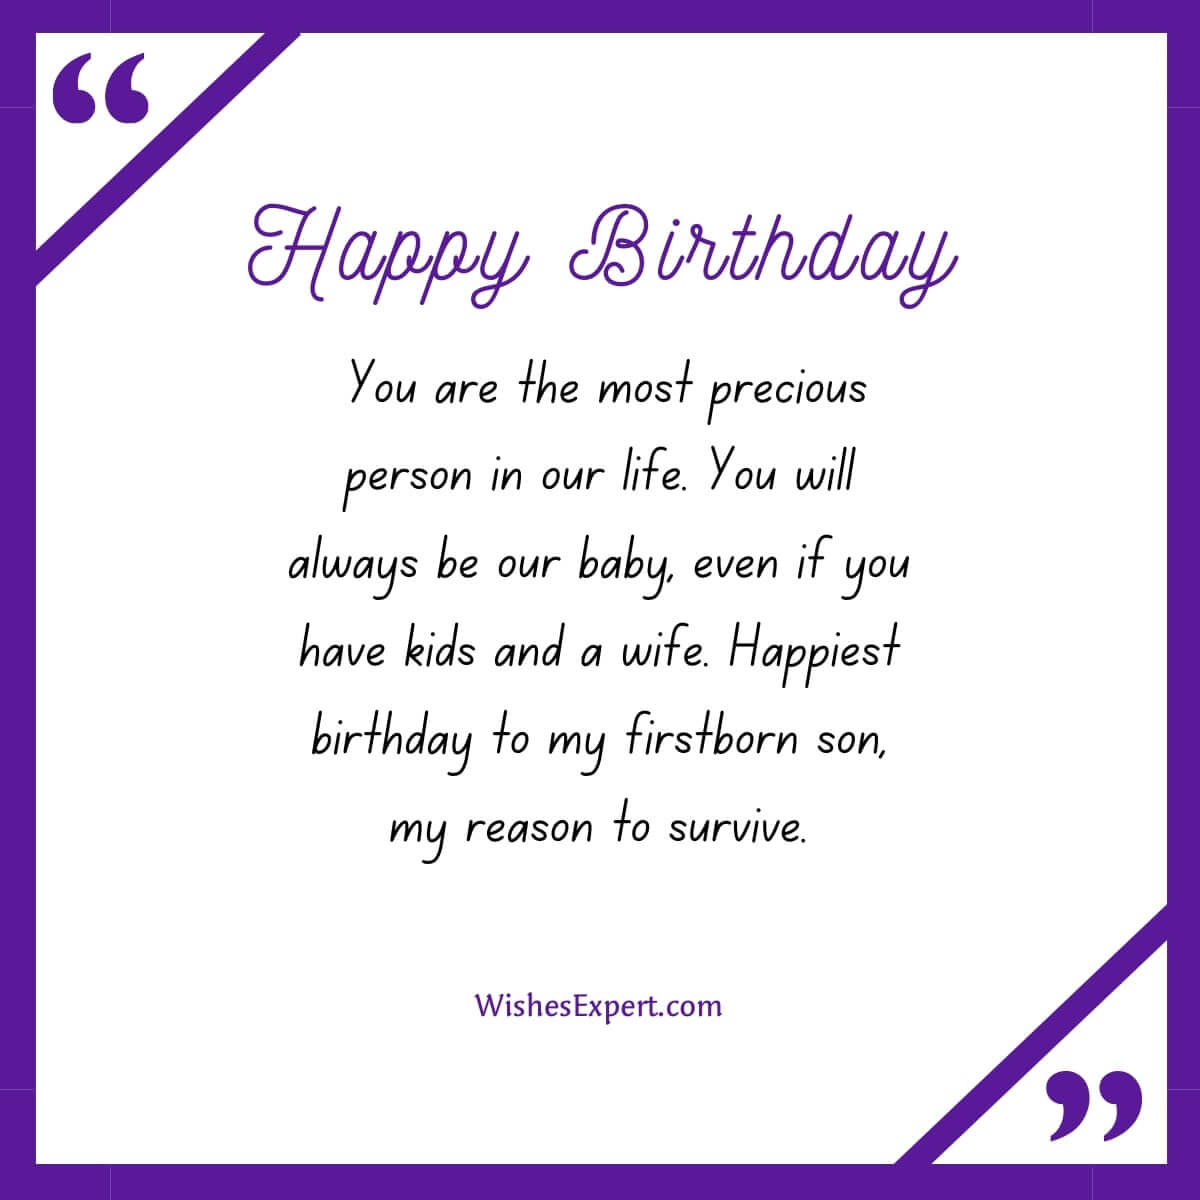 Emotional Birthday Wishes for My First-Born Son